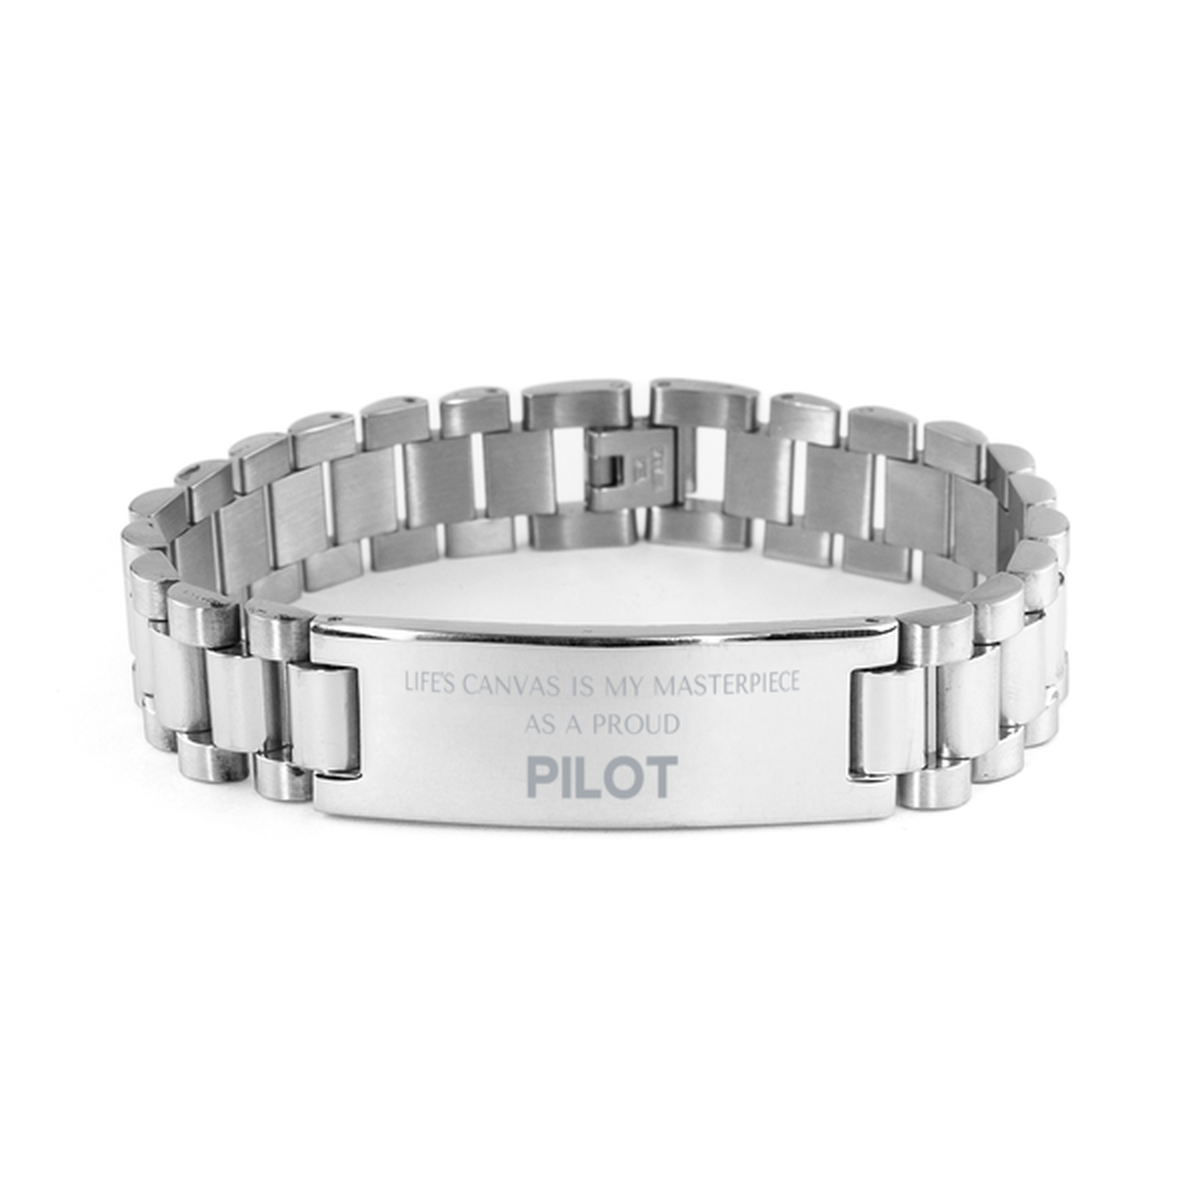 Proud Pilot Gifts, Life's canvas is my masterpiece, Epic Birthday Christmas Unique Ladder Stainless Steel Bracelet For Pilot, Coworkers, Men, Women, Friends